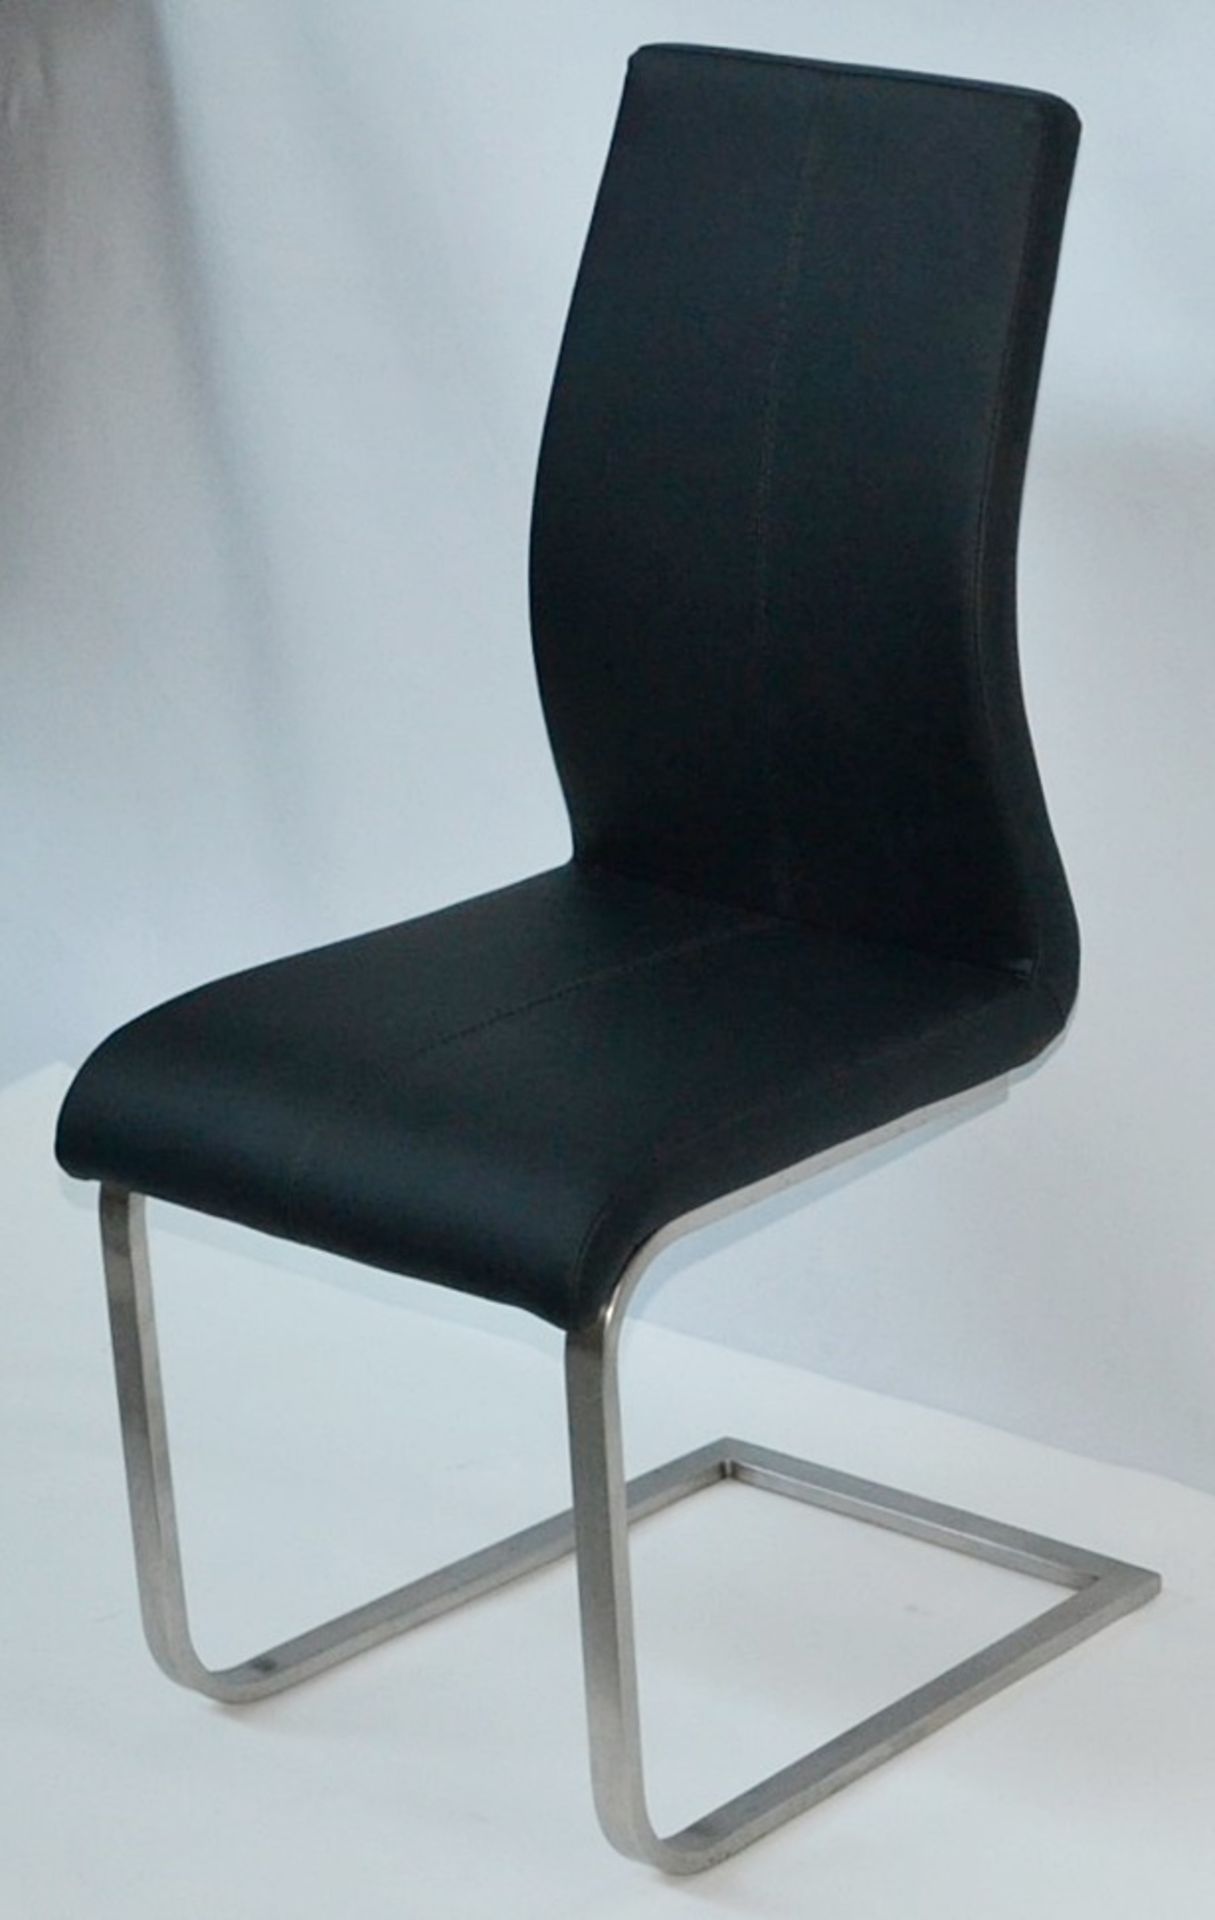 4 x Black Soft Leather Dining Chairs - Featuring A Curved Ergonomic Design With Metal Cantilever Bas - Image 3 of 4